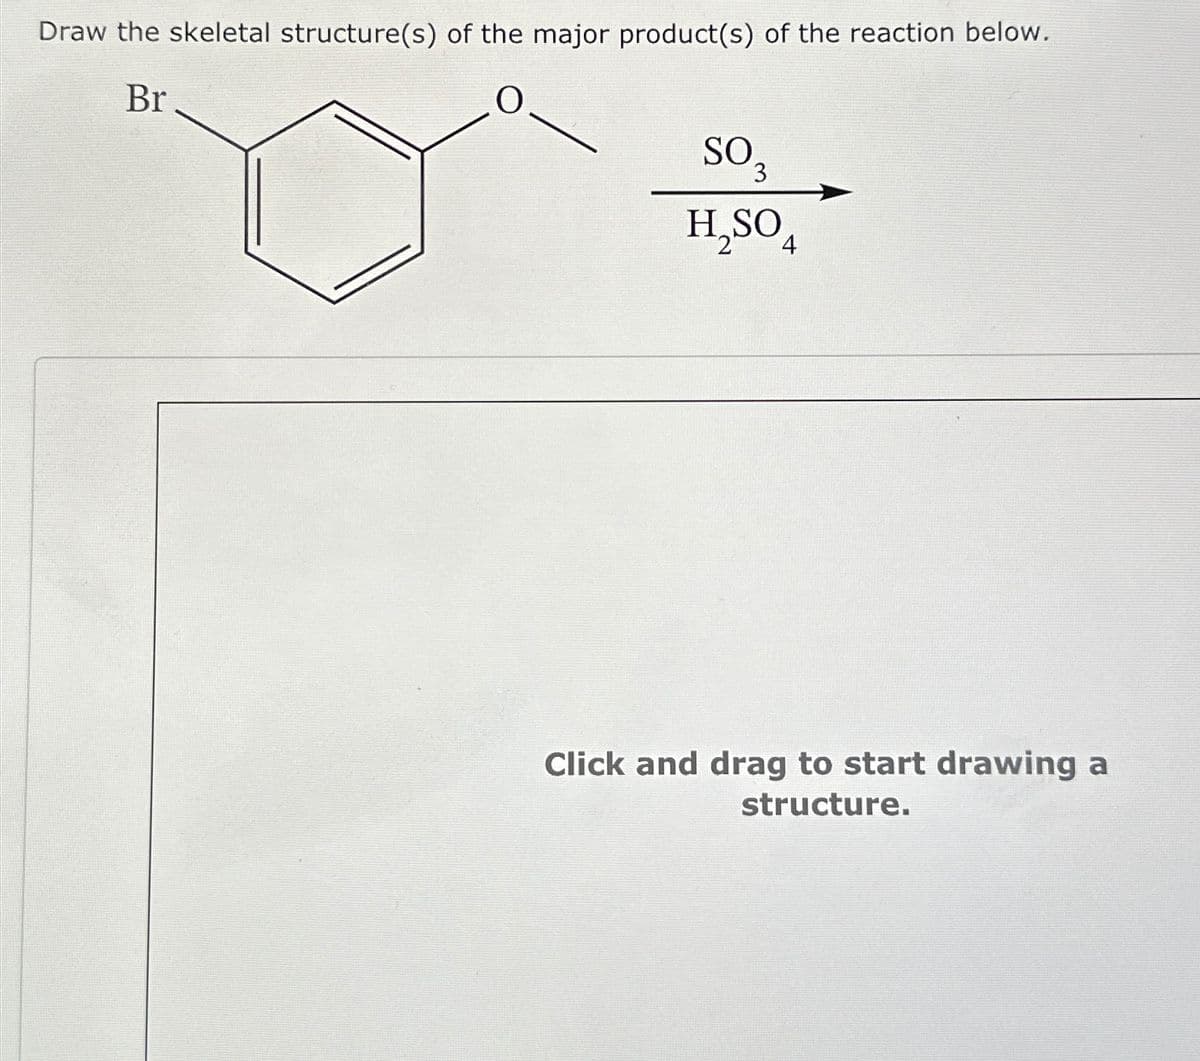 Draw the skeletal structure(s) of the major product(s) of the reaction below.
Br
O
SO 3
H₂SO4
Click and drag to start drawing a
structure.